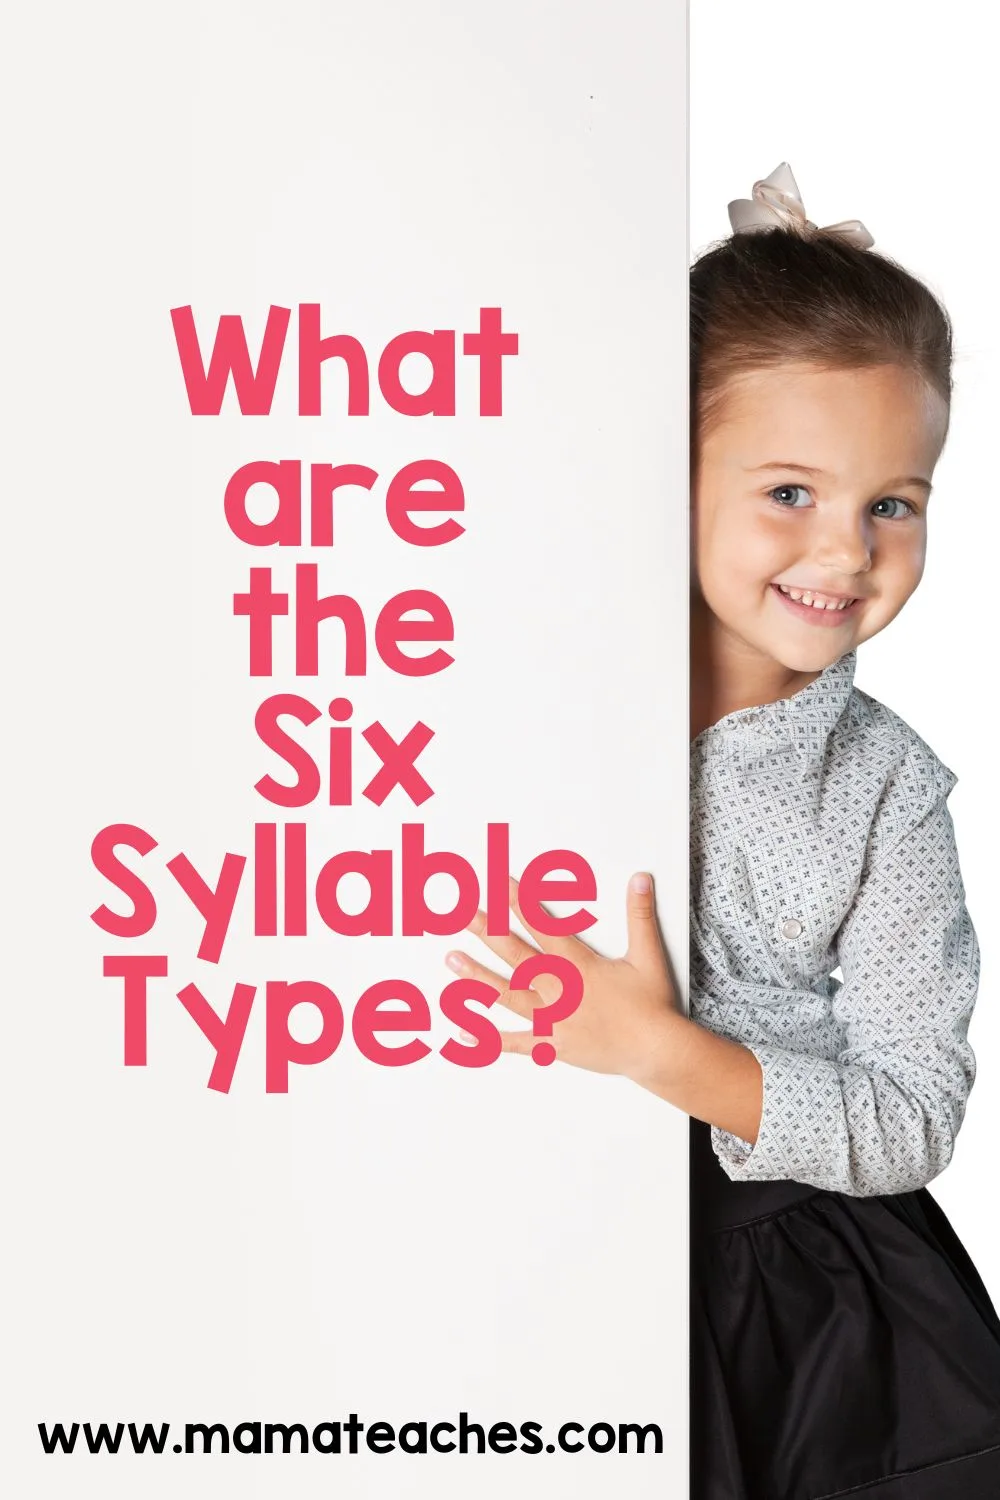 What are the Six Syllable Types